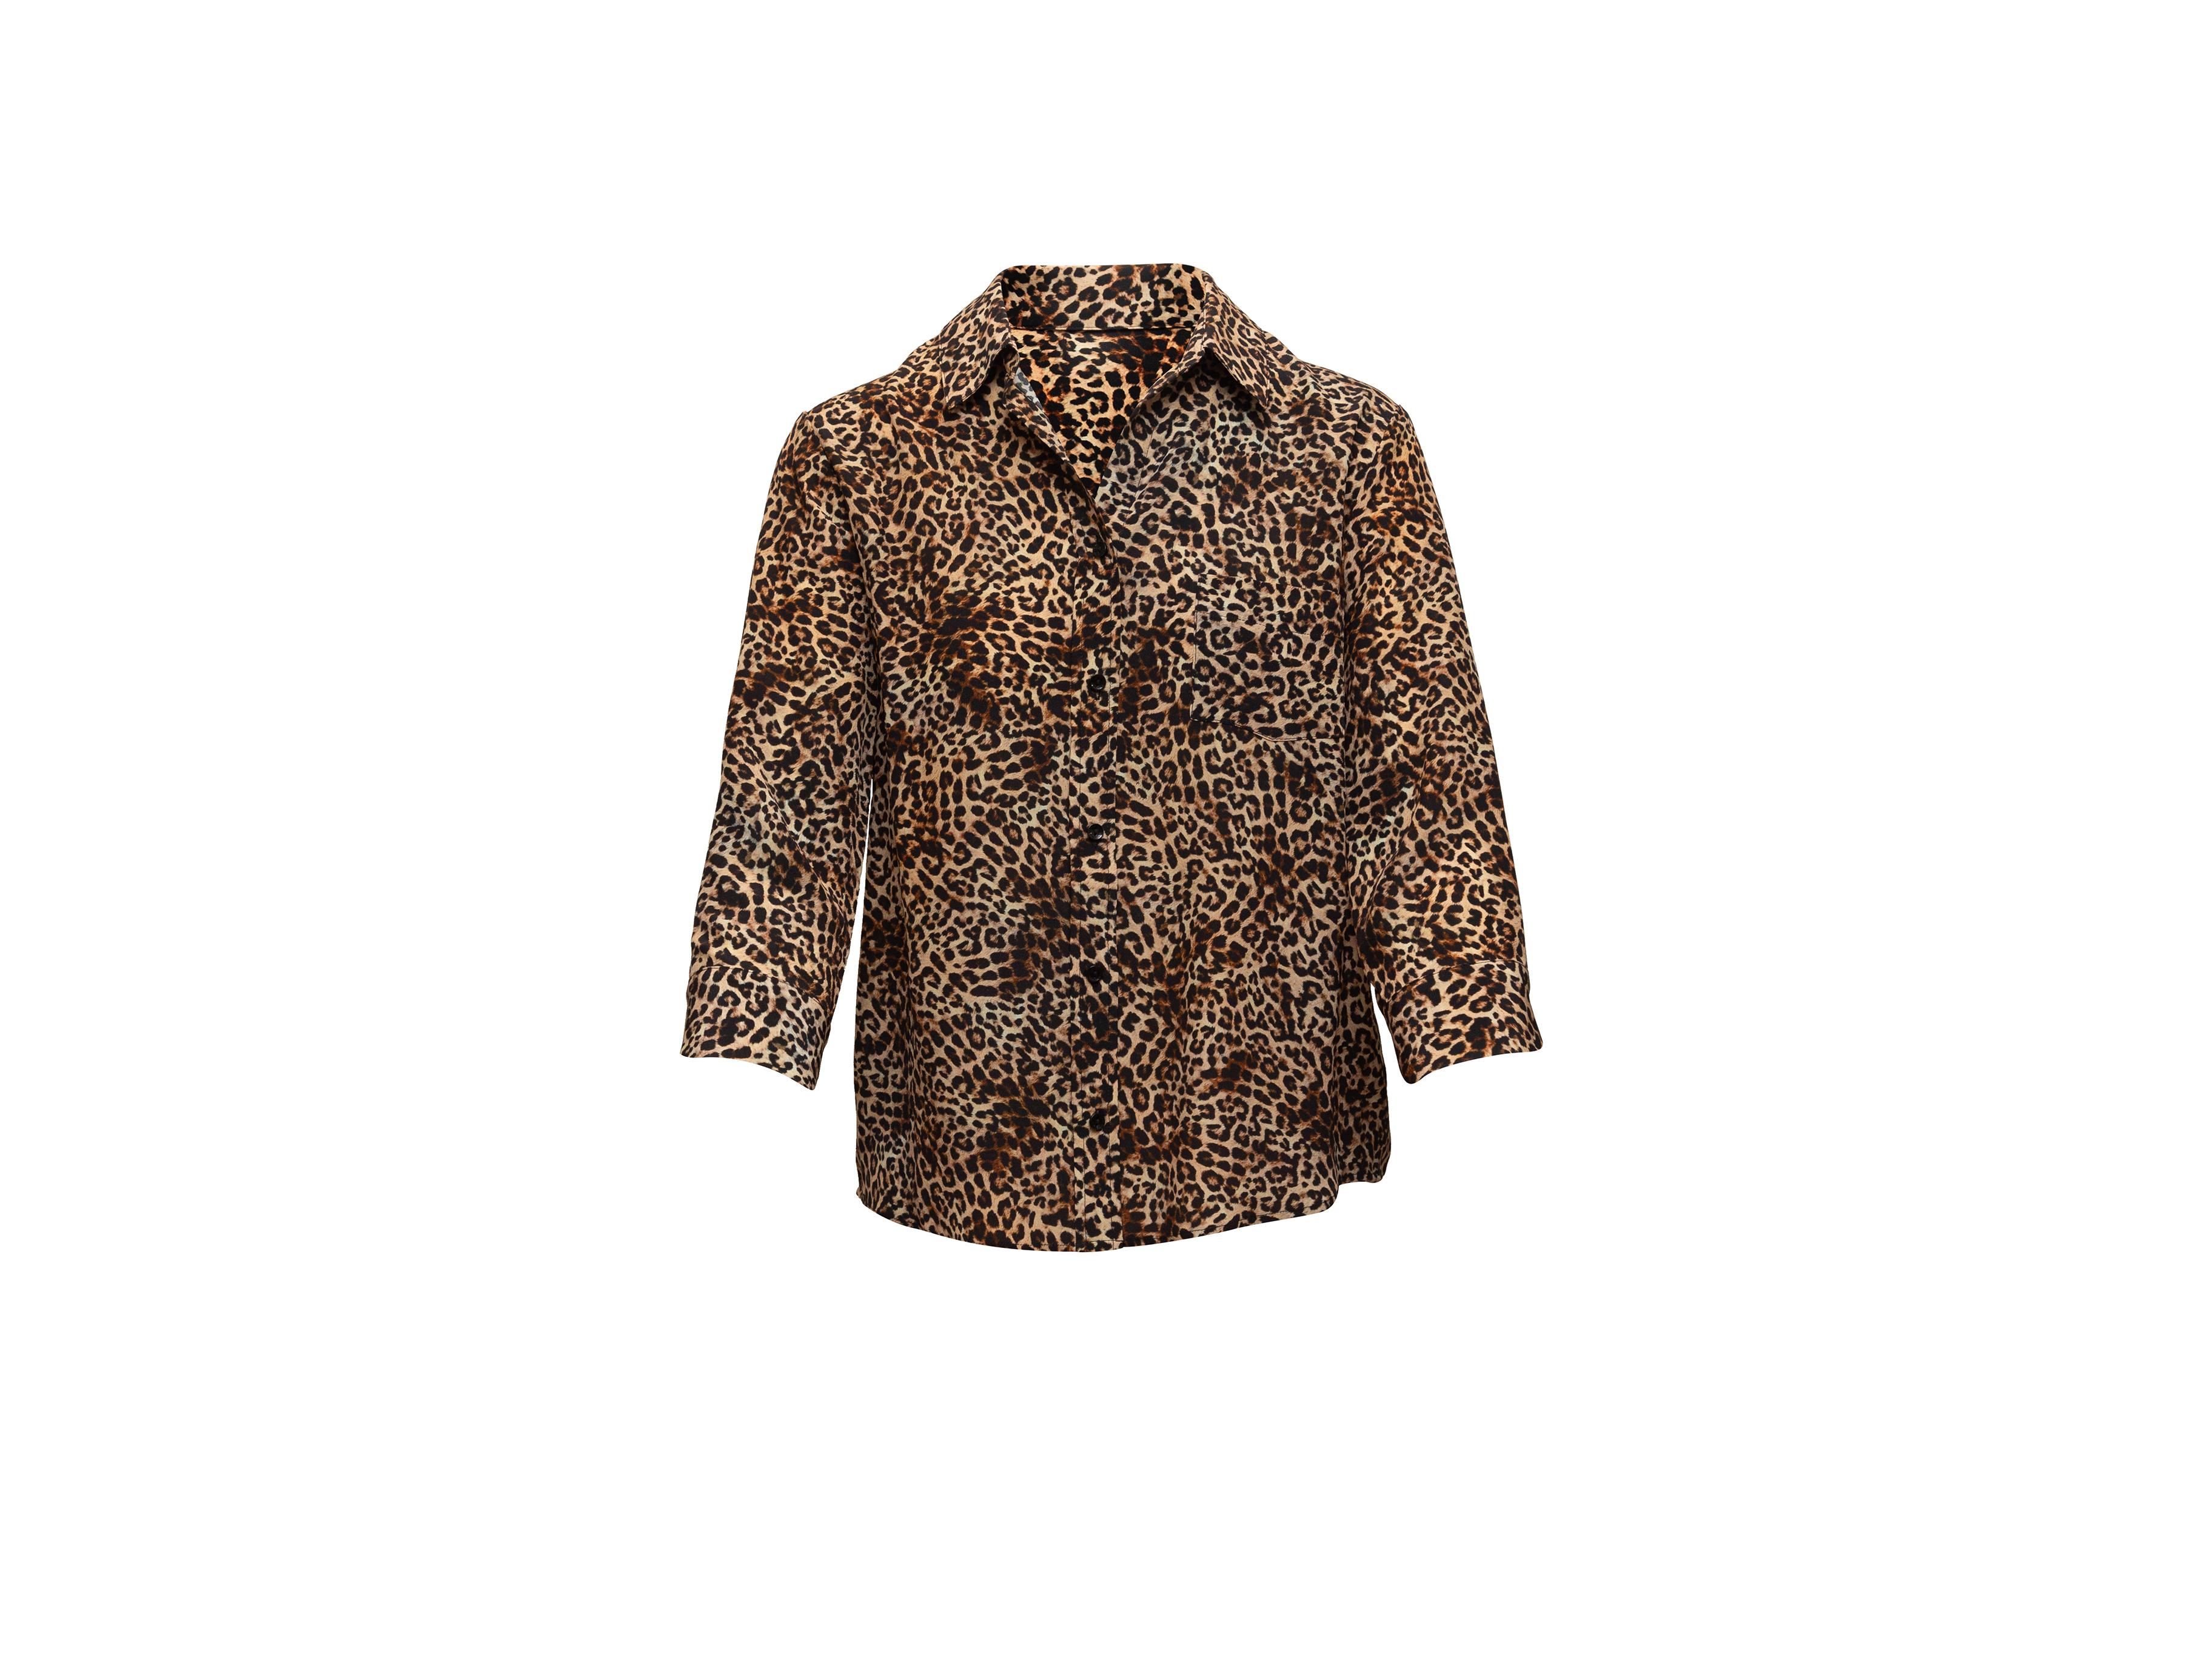 Product details: Tan and black silk leopard print top by Anine Bing. Pointed collar. Three-quarter sleeves. Button closures at center front. 40